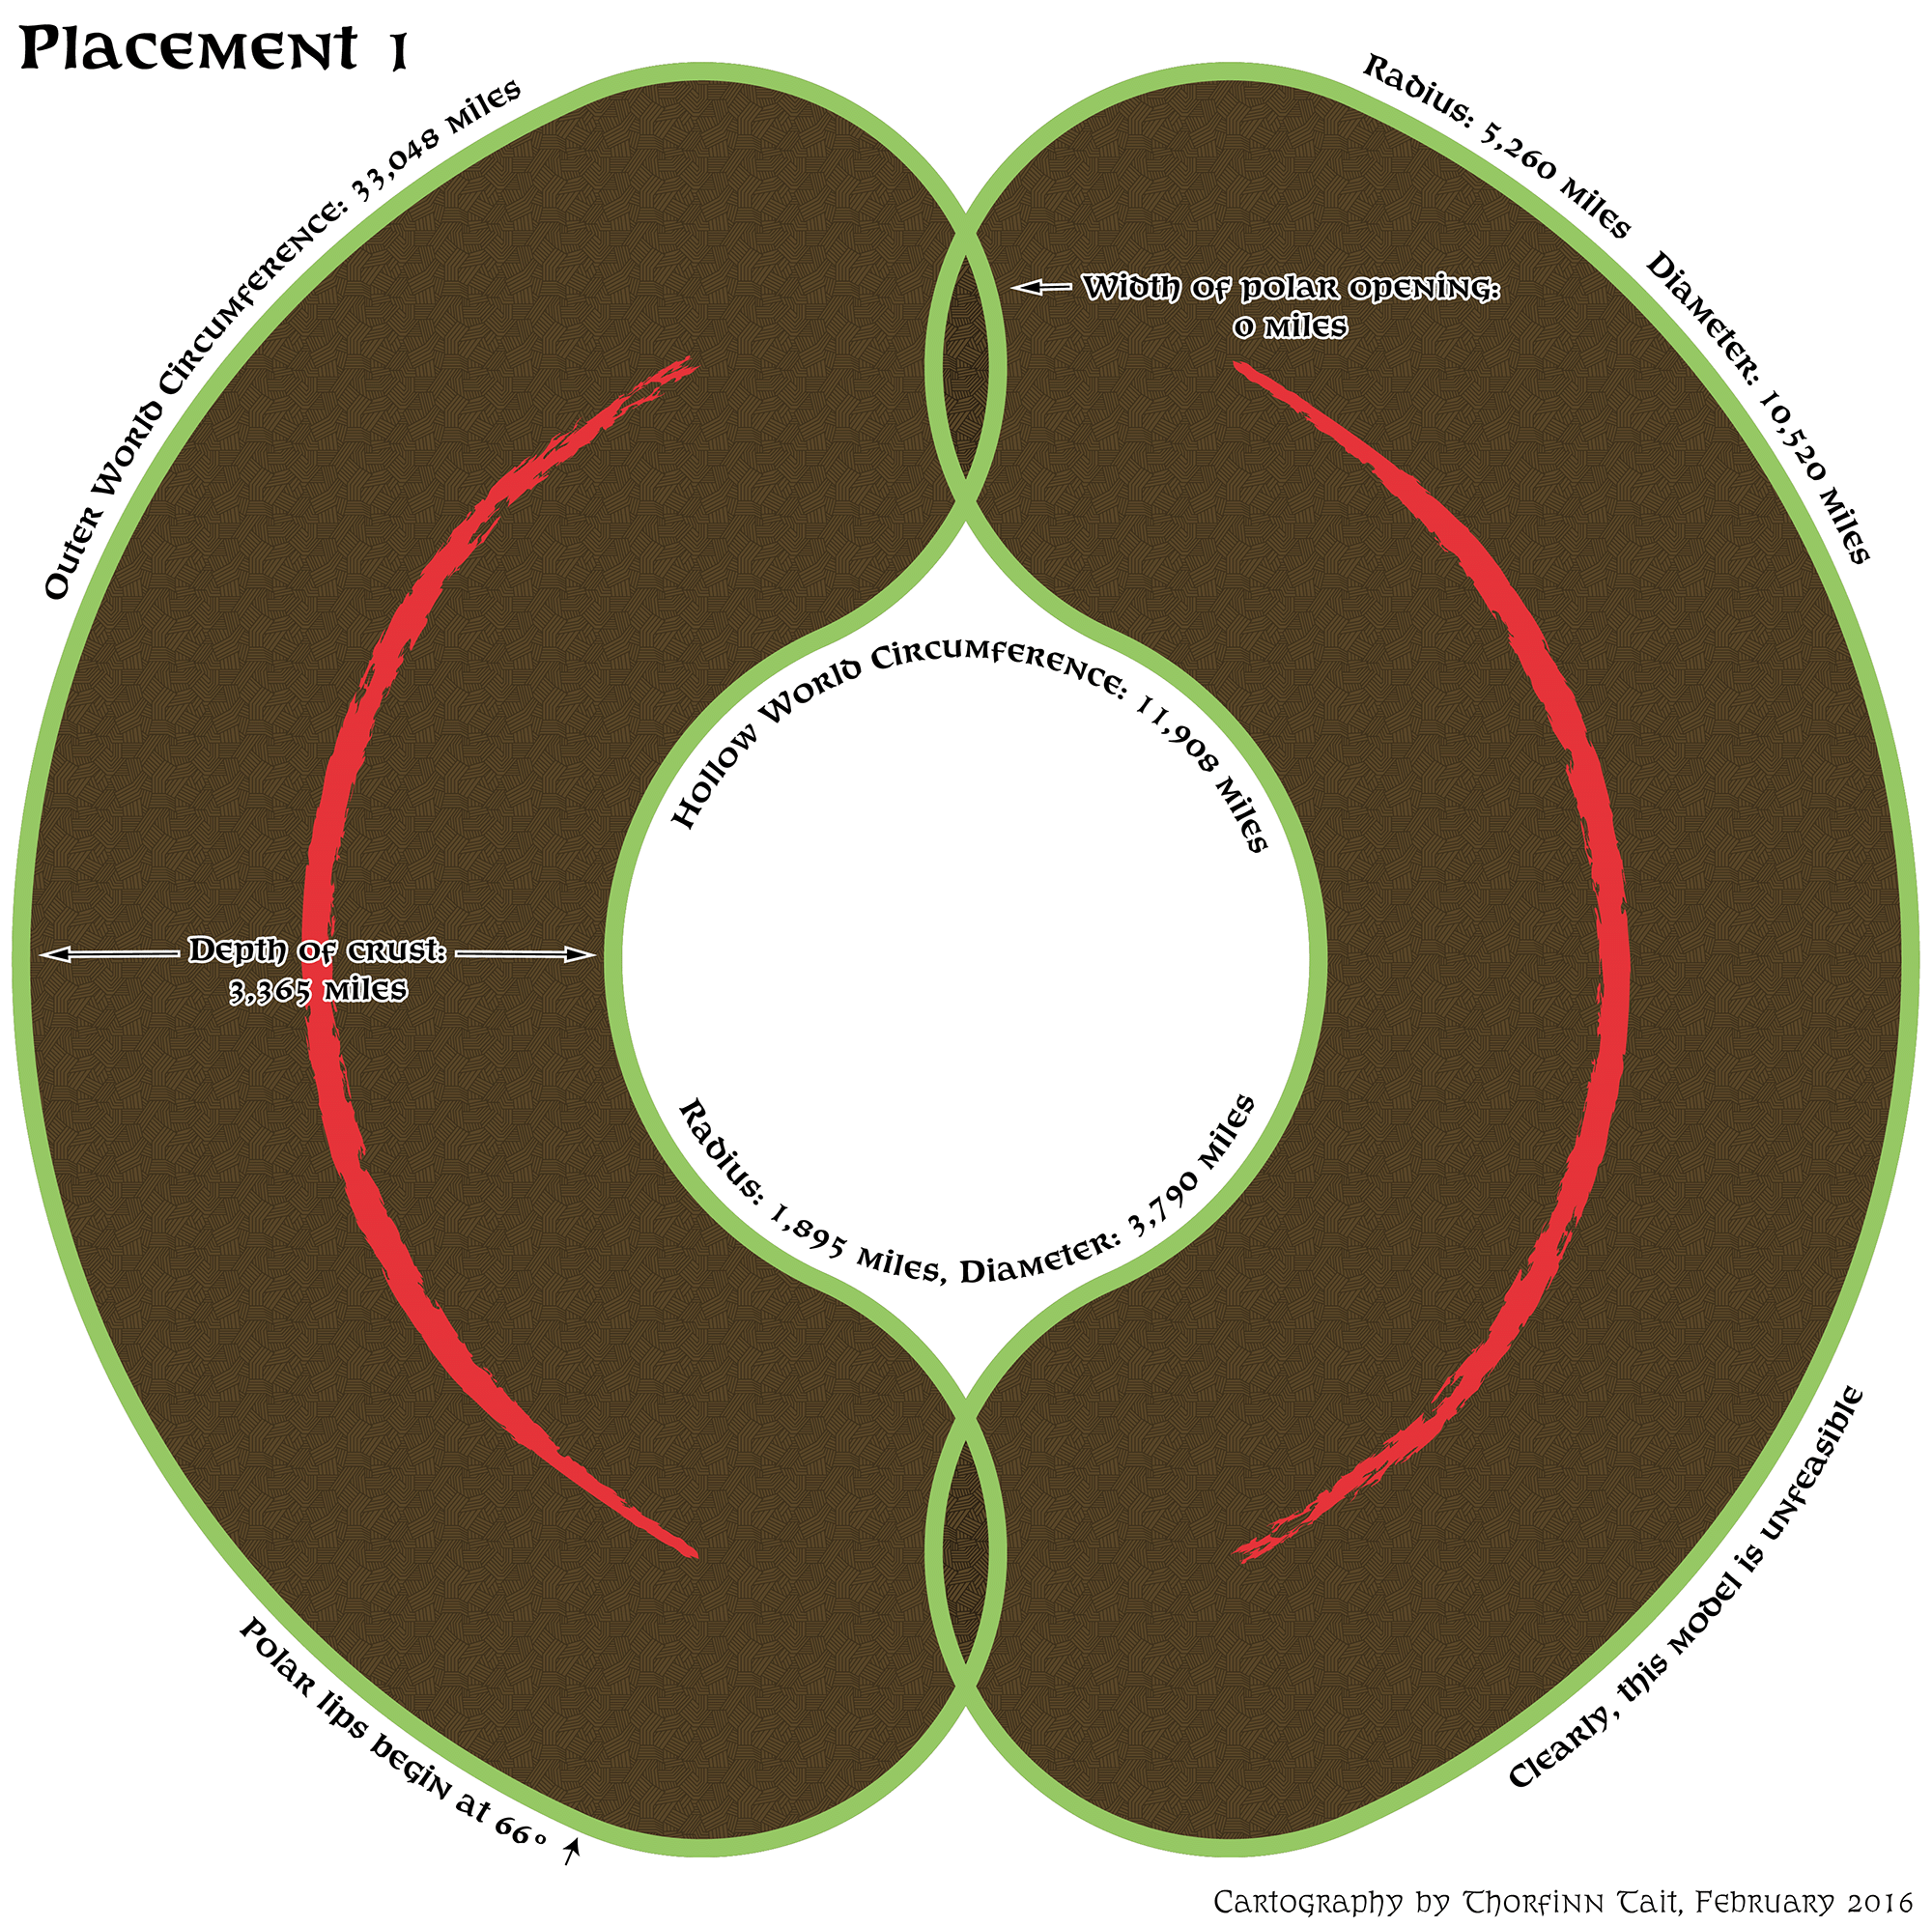 Placement 1 cross-section